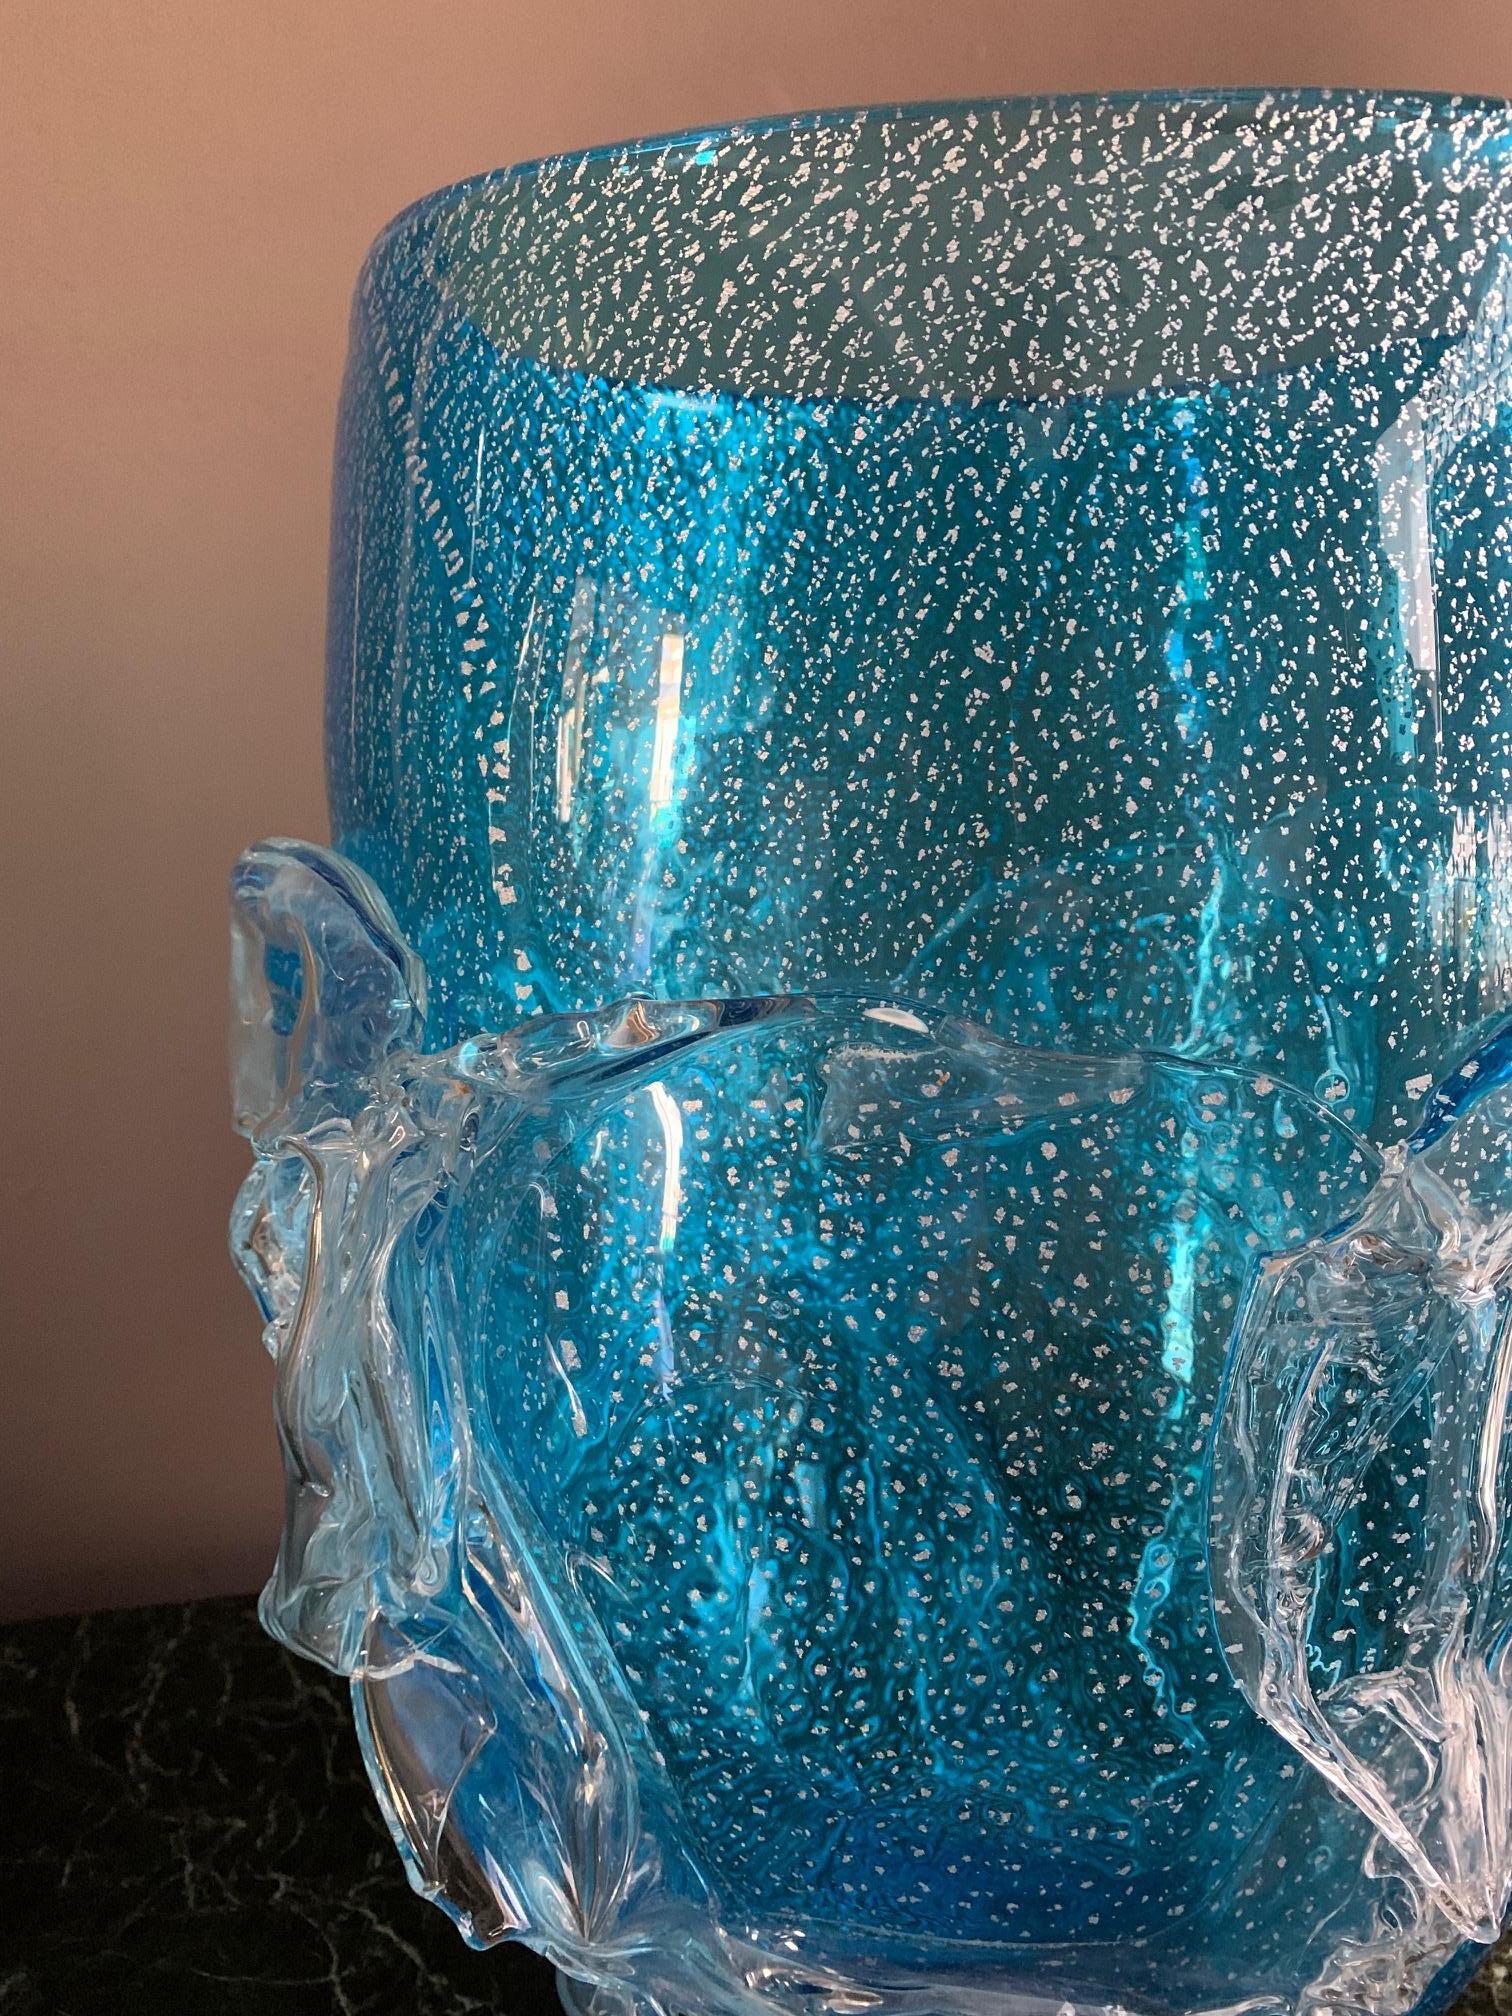 Large Murano glass from the 1970s-1980s in blue and silver powder base, signed at the base by Maurizio Artoni.